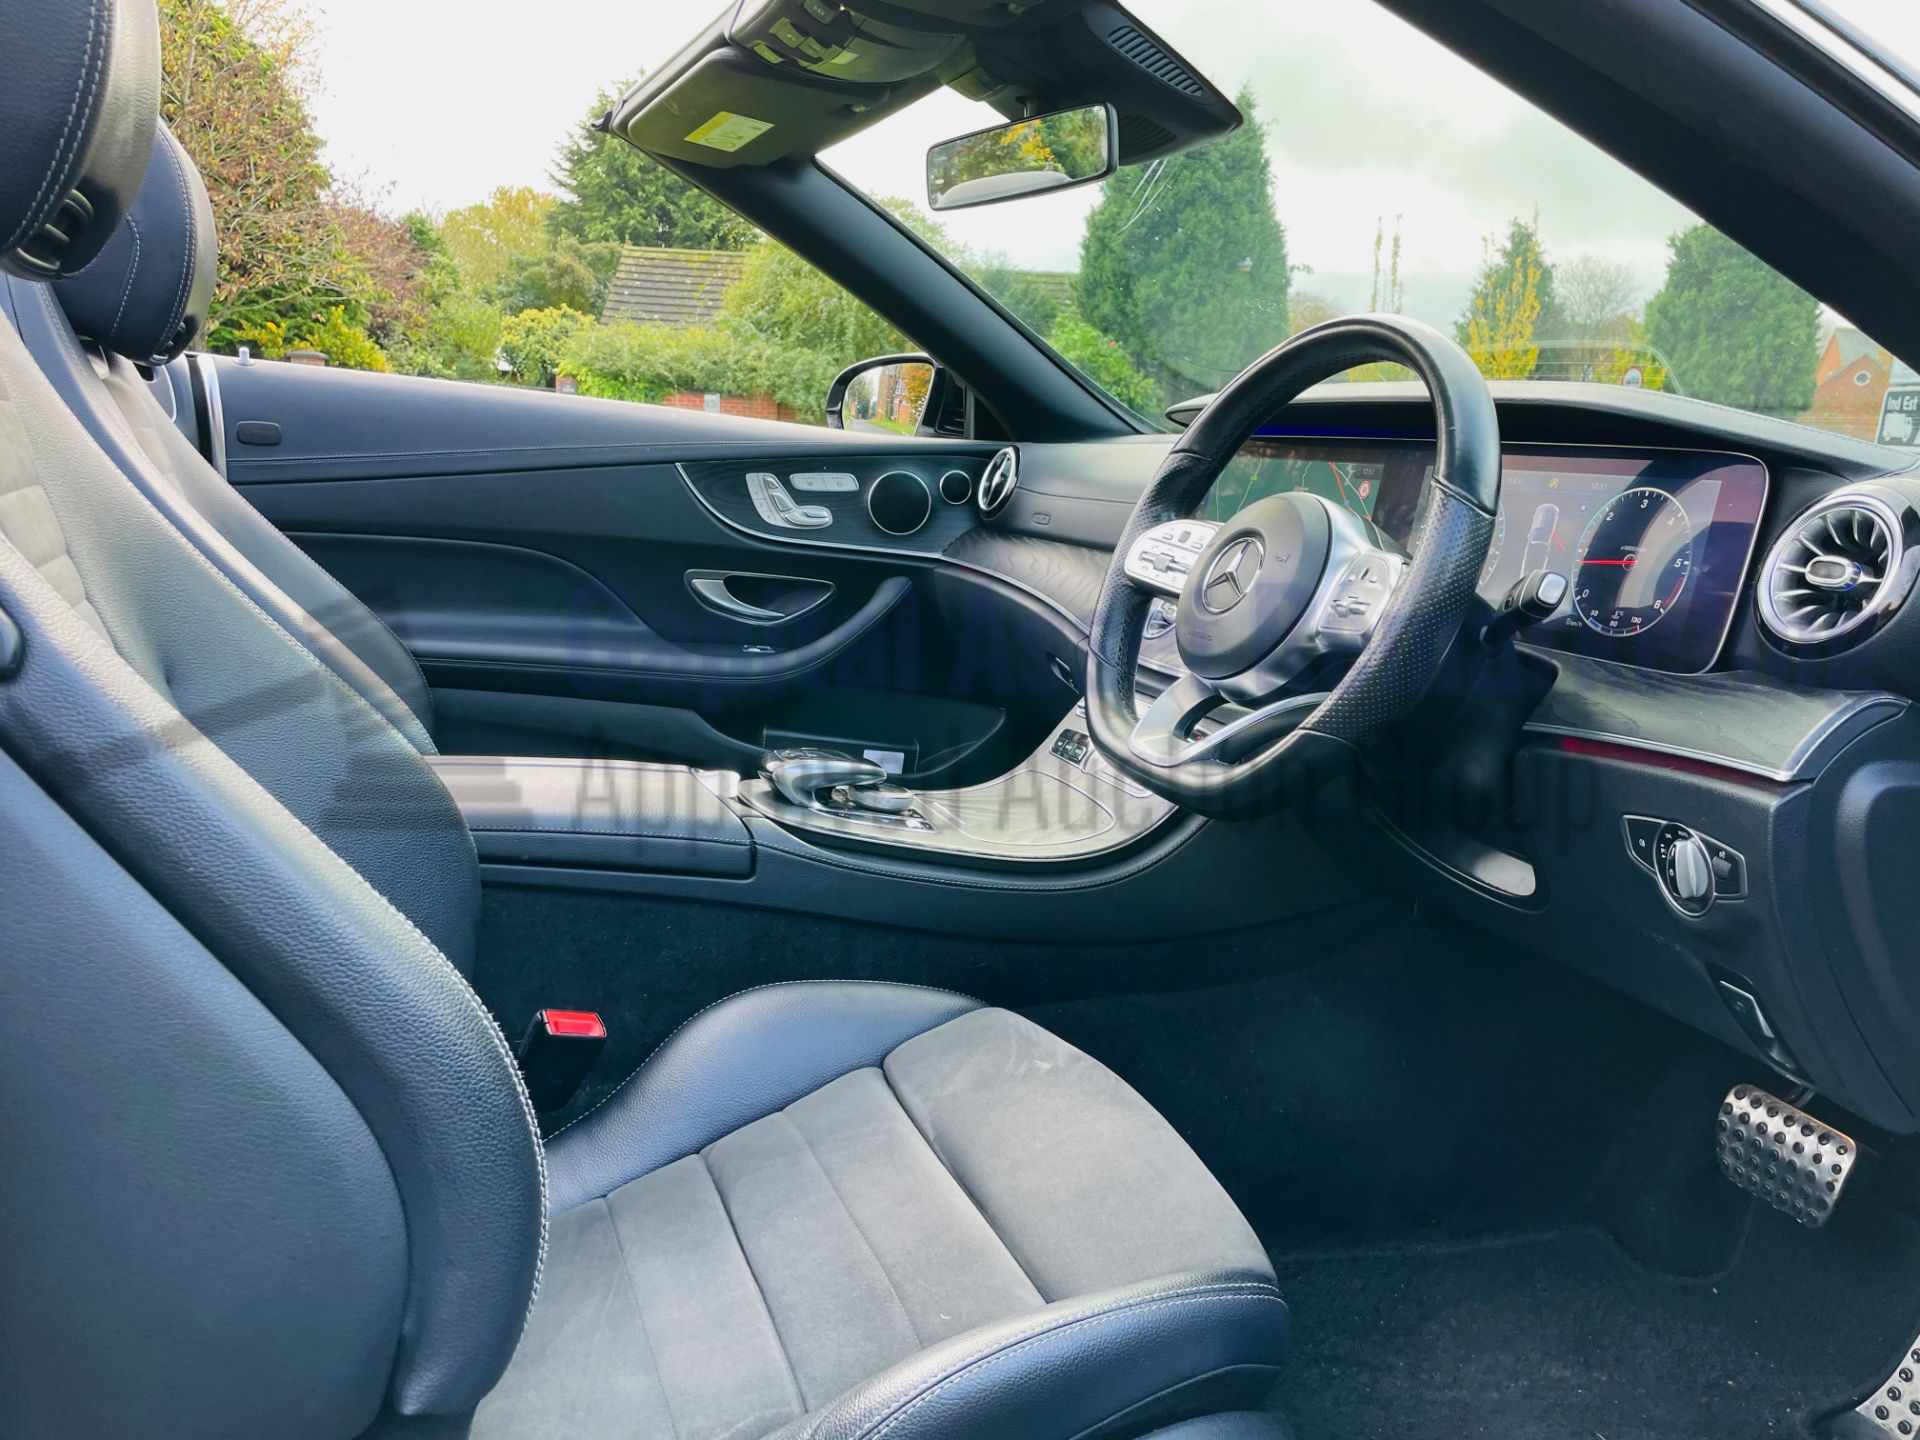 MERCEDES-BENZ E220D *AMG LINE - CABRIOLET* (2019 - EURO 6) '9G TRONIC AUTO - SAT NAV' *FULLY LOADED* - Image 50 of 66